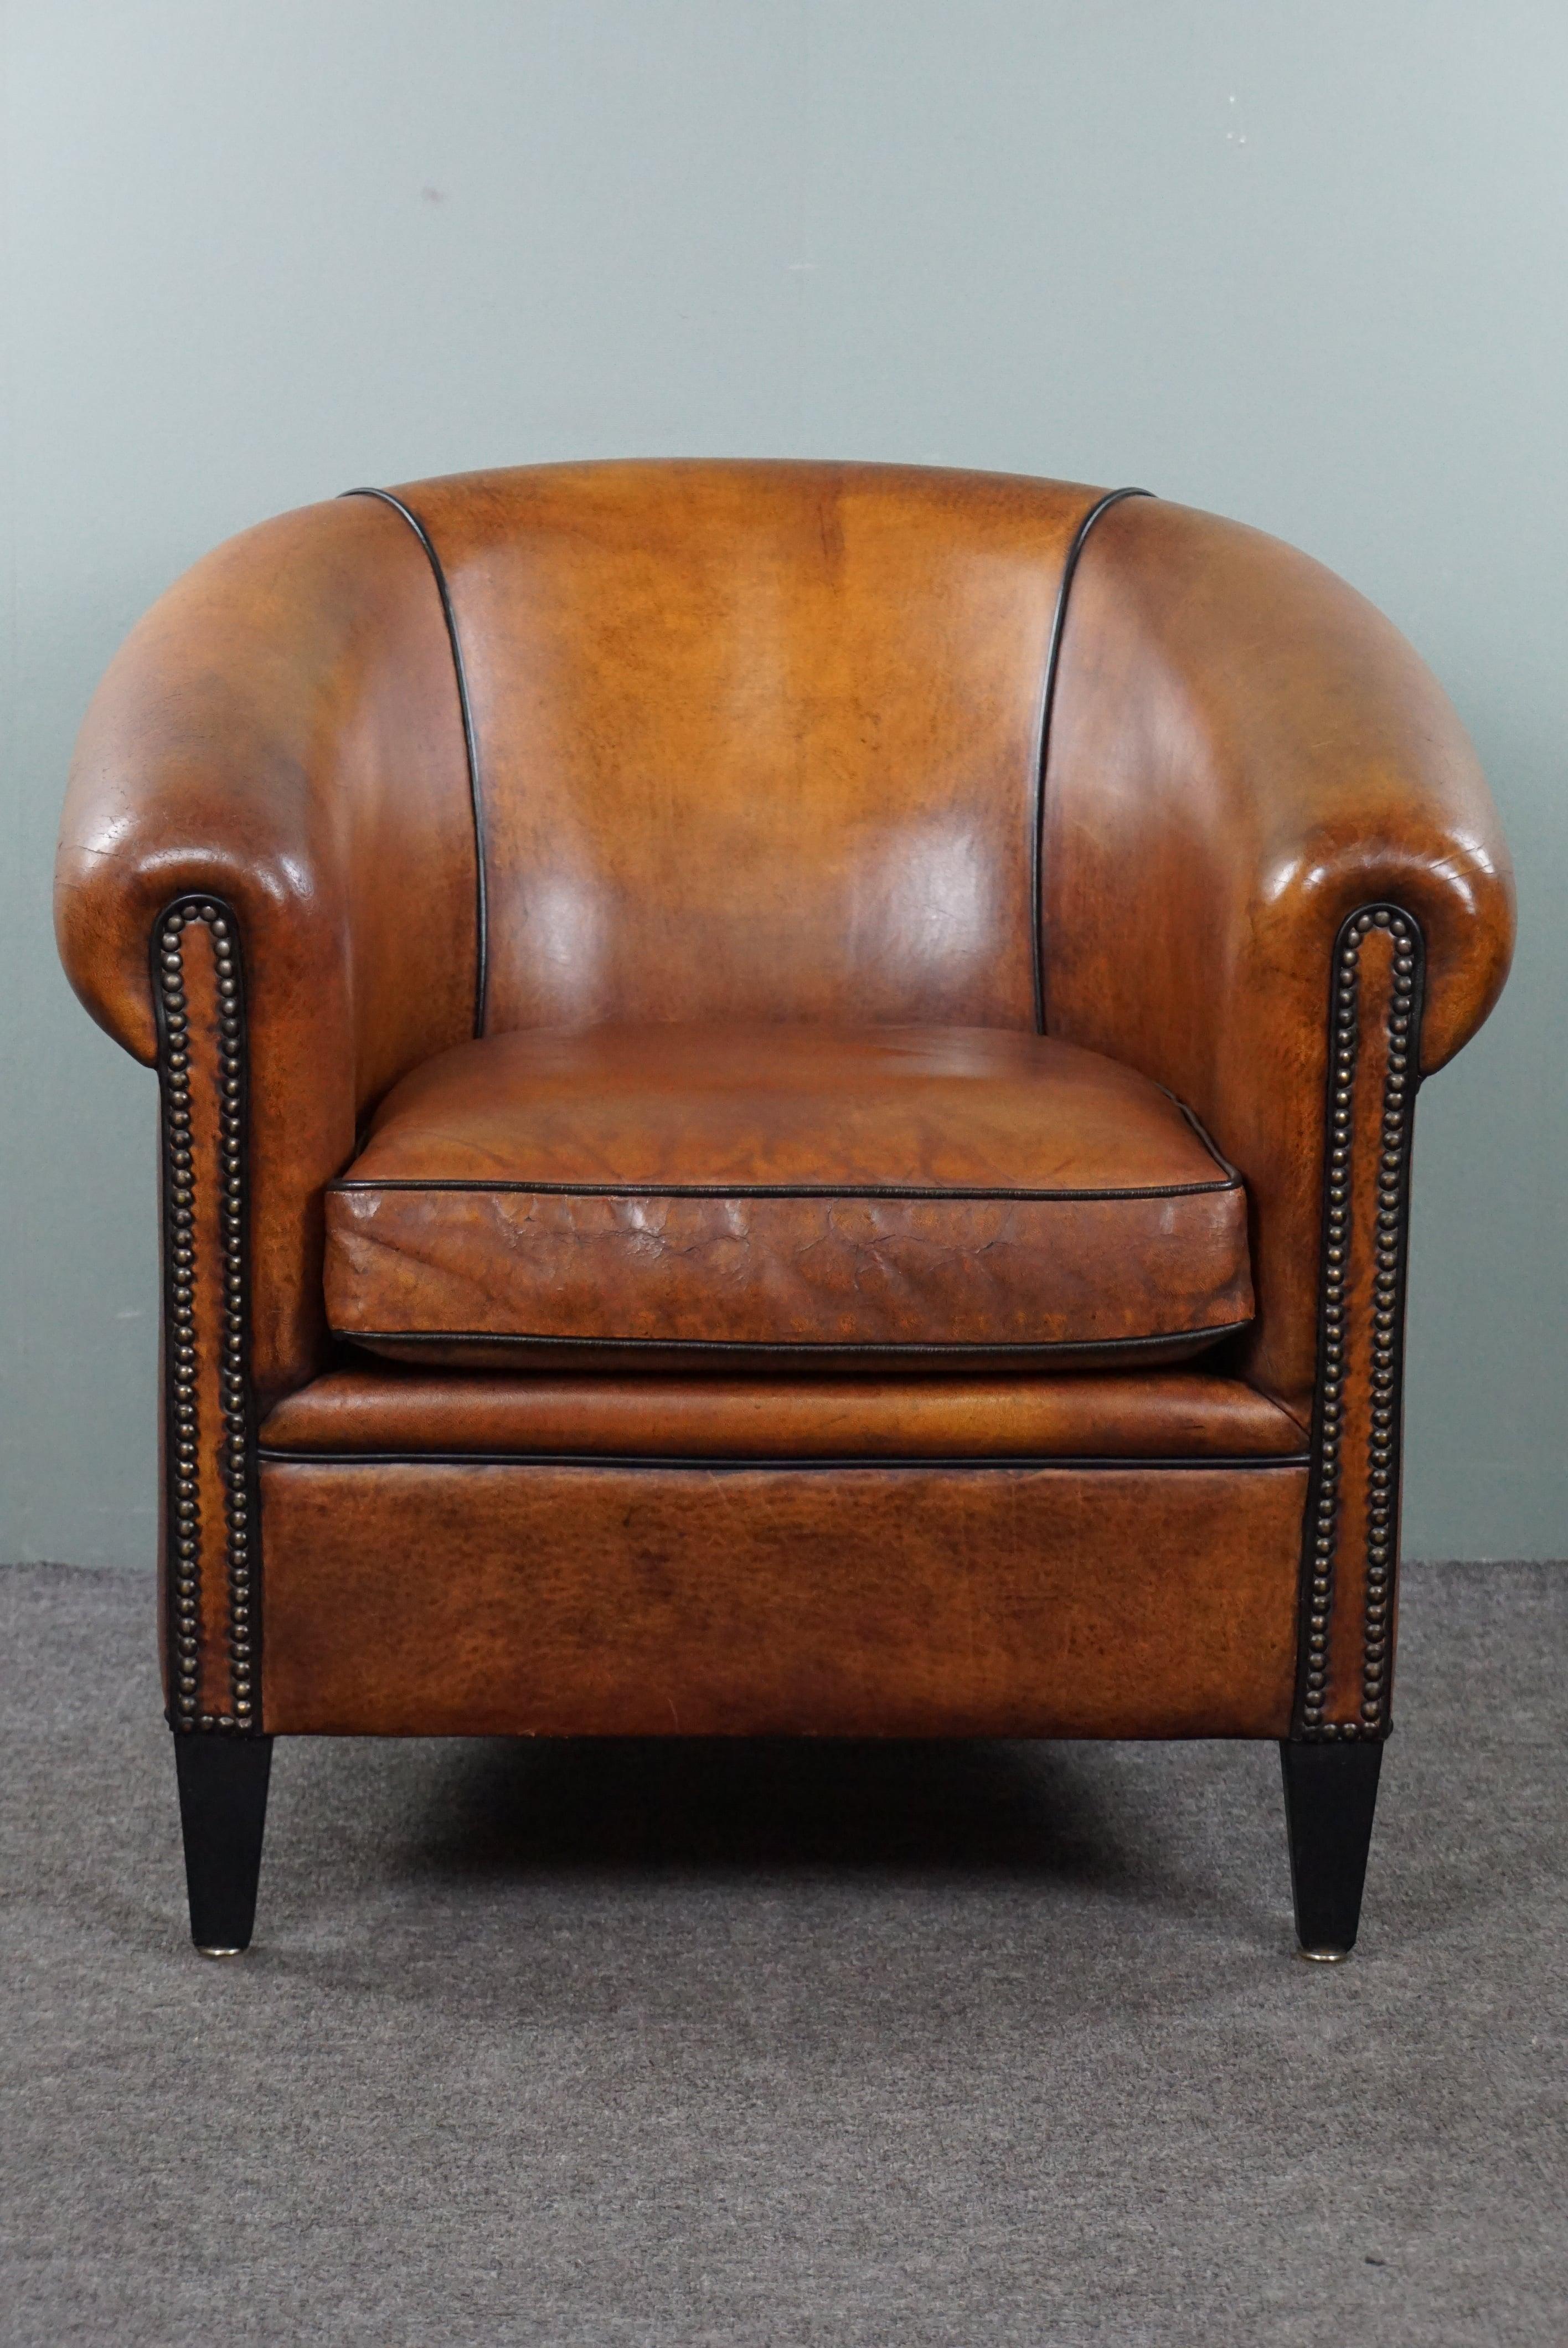 Offered is this beautiful timeless sheep leather gem with an unparalleled patina. This delightfully comfortable sheep leather club armchair is and remains an all-time favorite.

Whether your preference leans toward a modern, classic, or designer